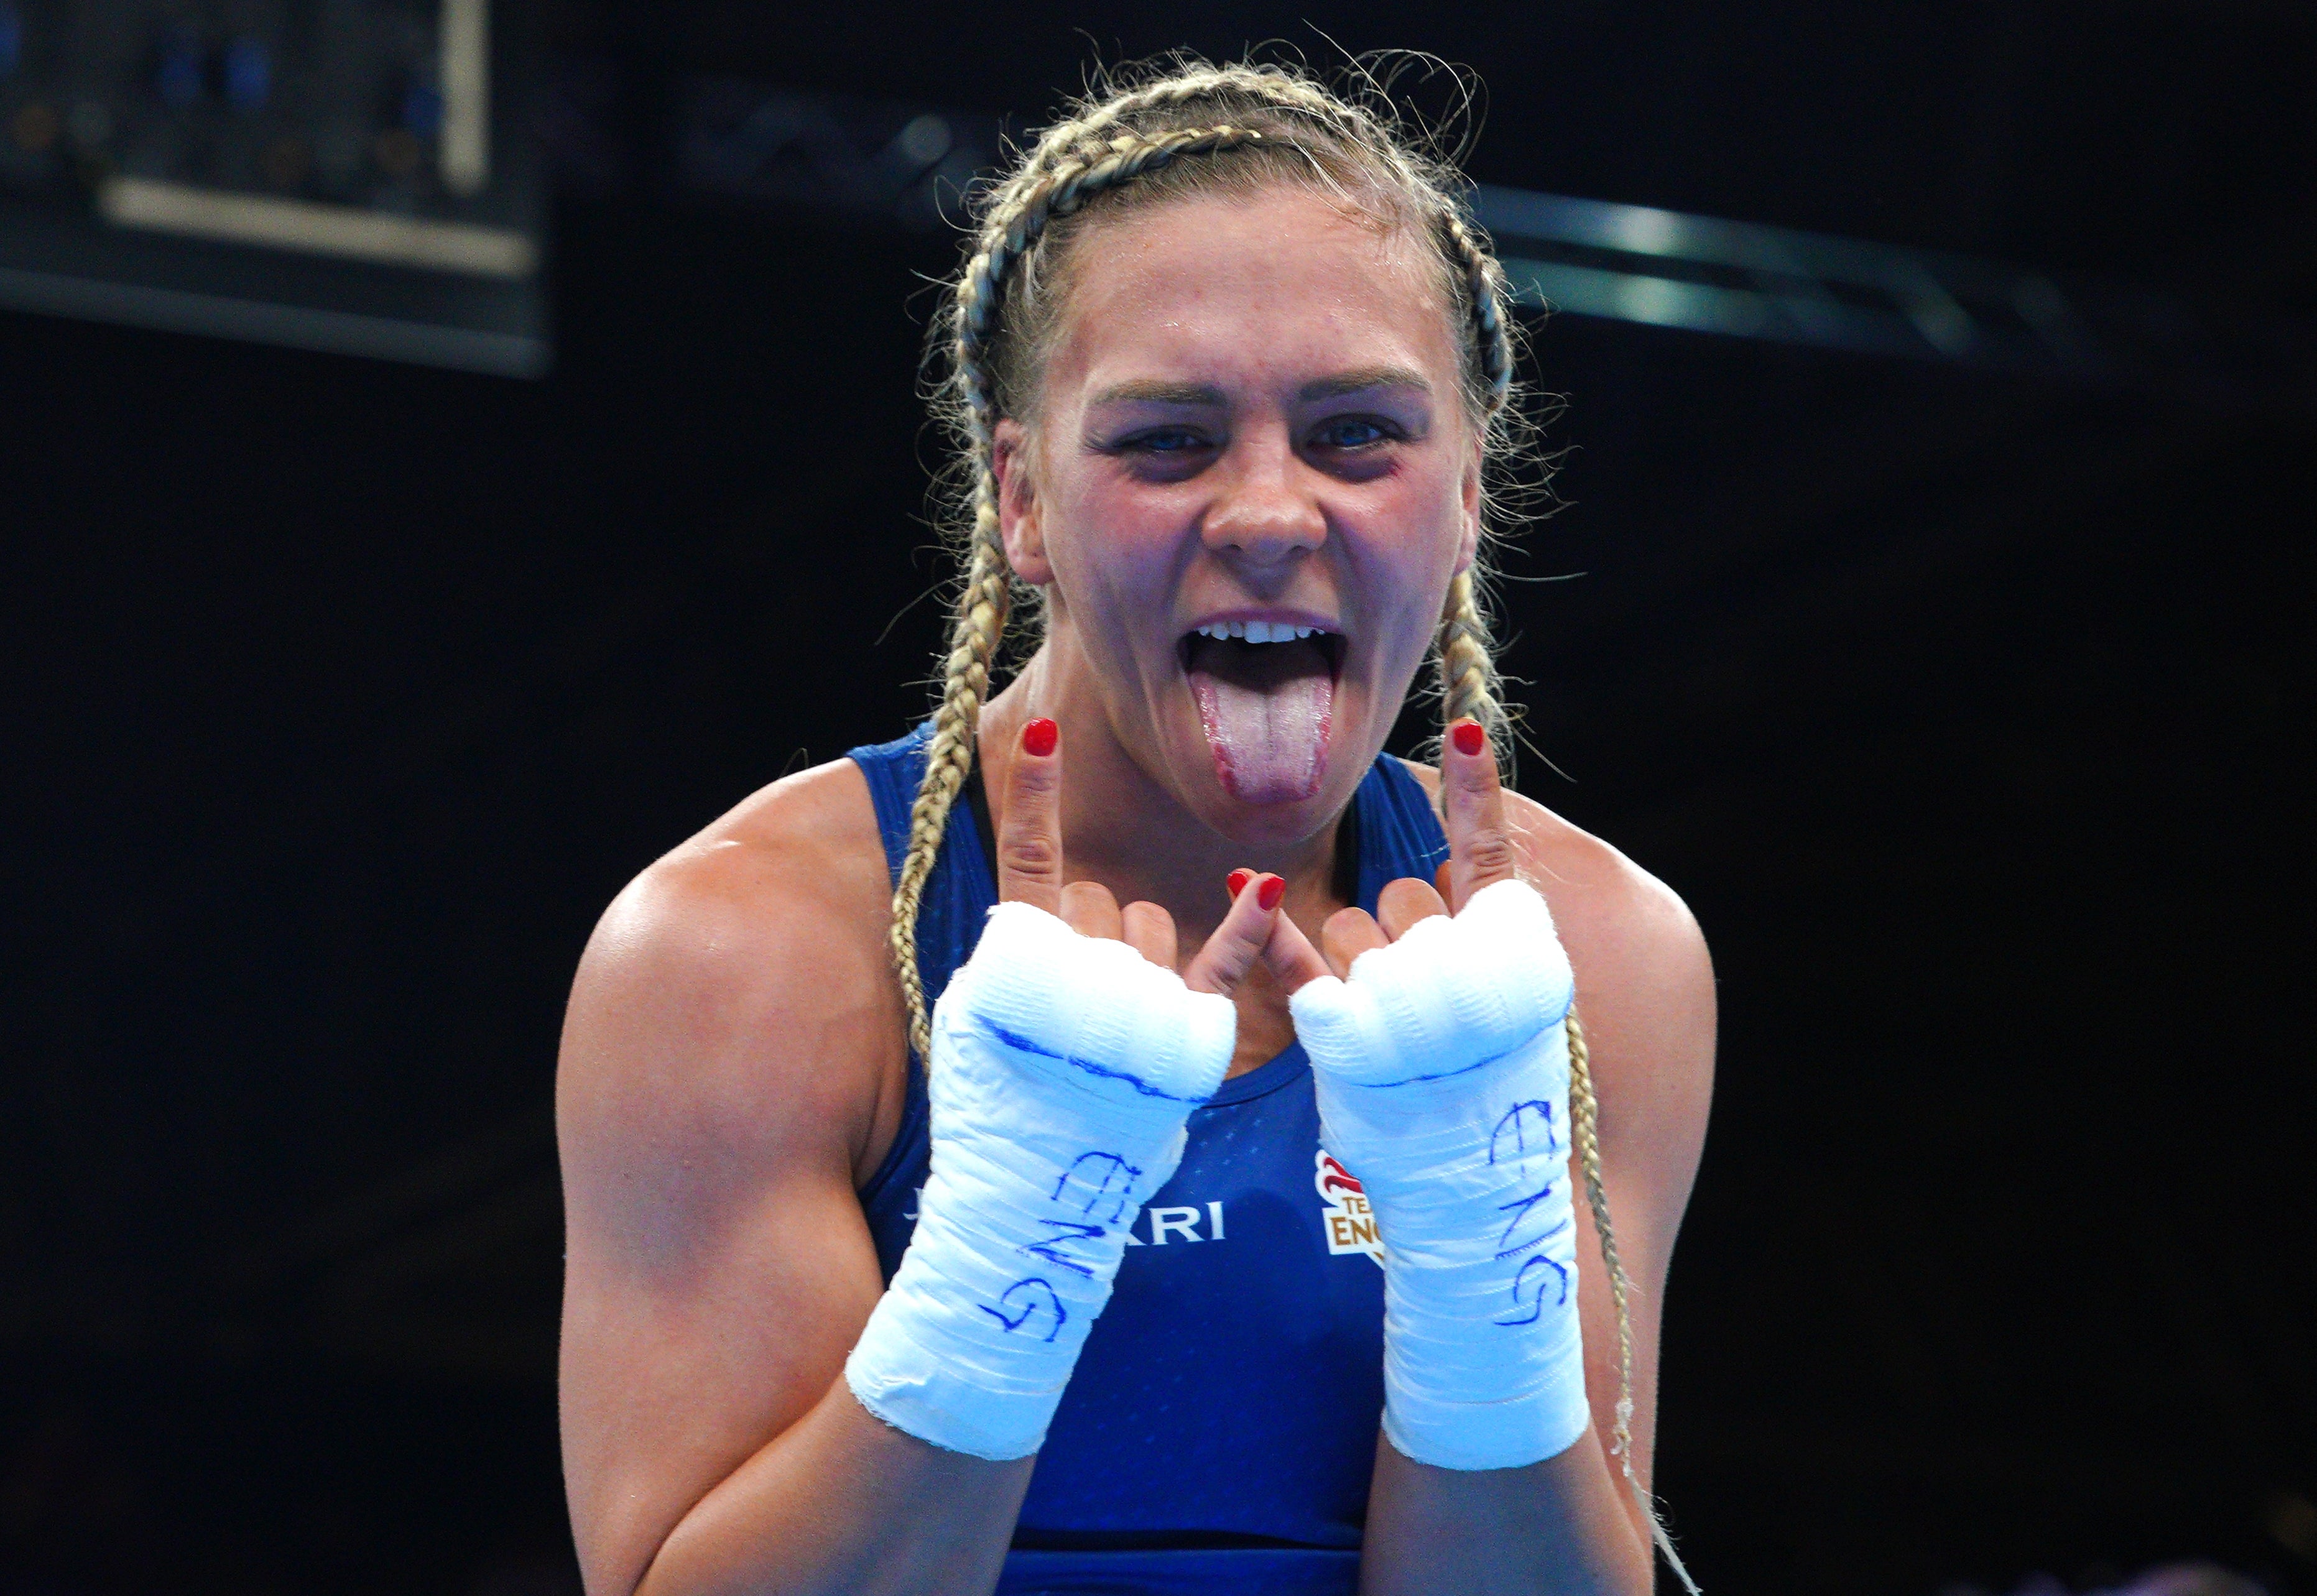 England’s Demie-Jade Resztan hopes to kick-start a boxing gold rush (Peter Byrne/PA)